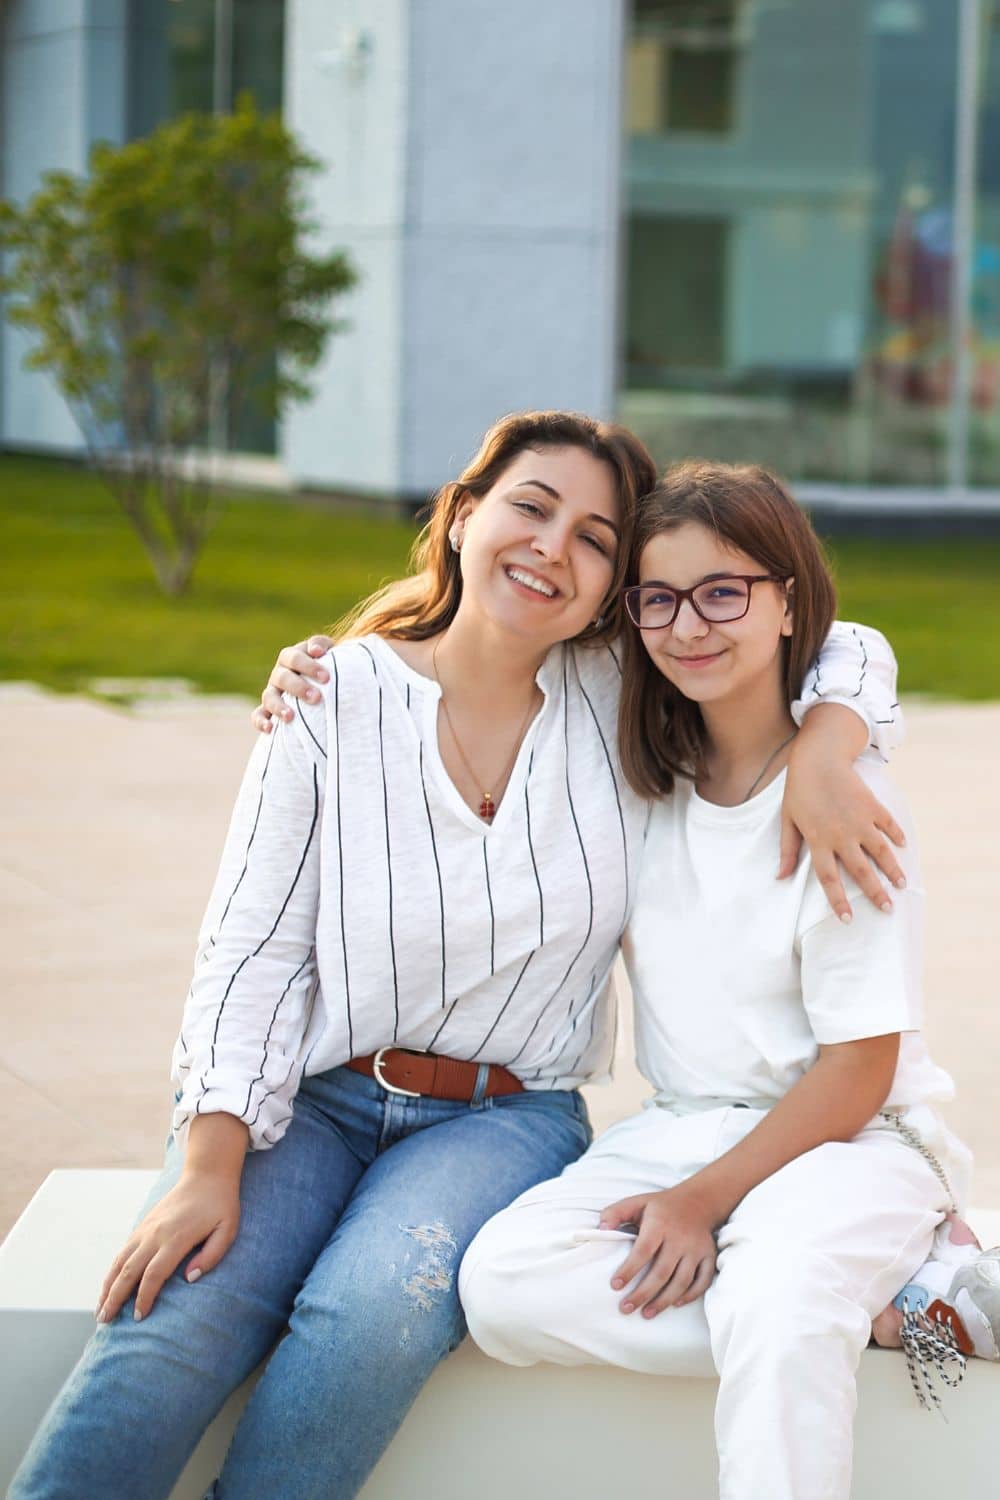 Embracing the Joy How Parents Can Enjoy Their Children's Teen Years